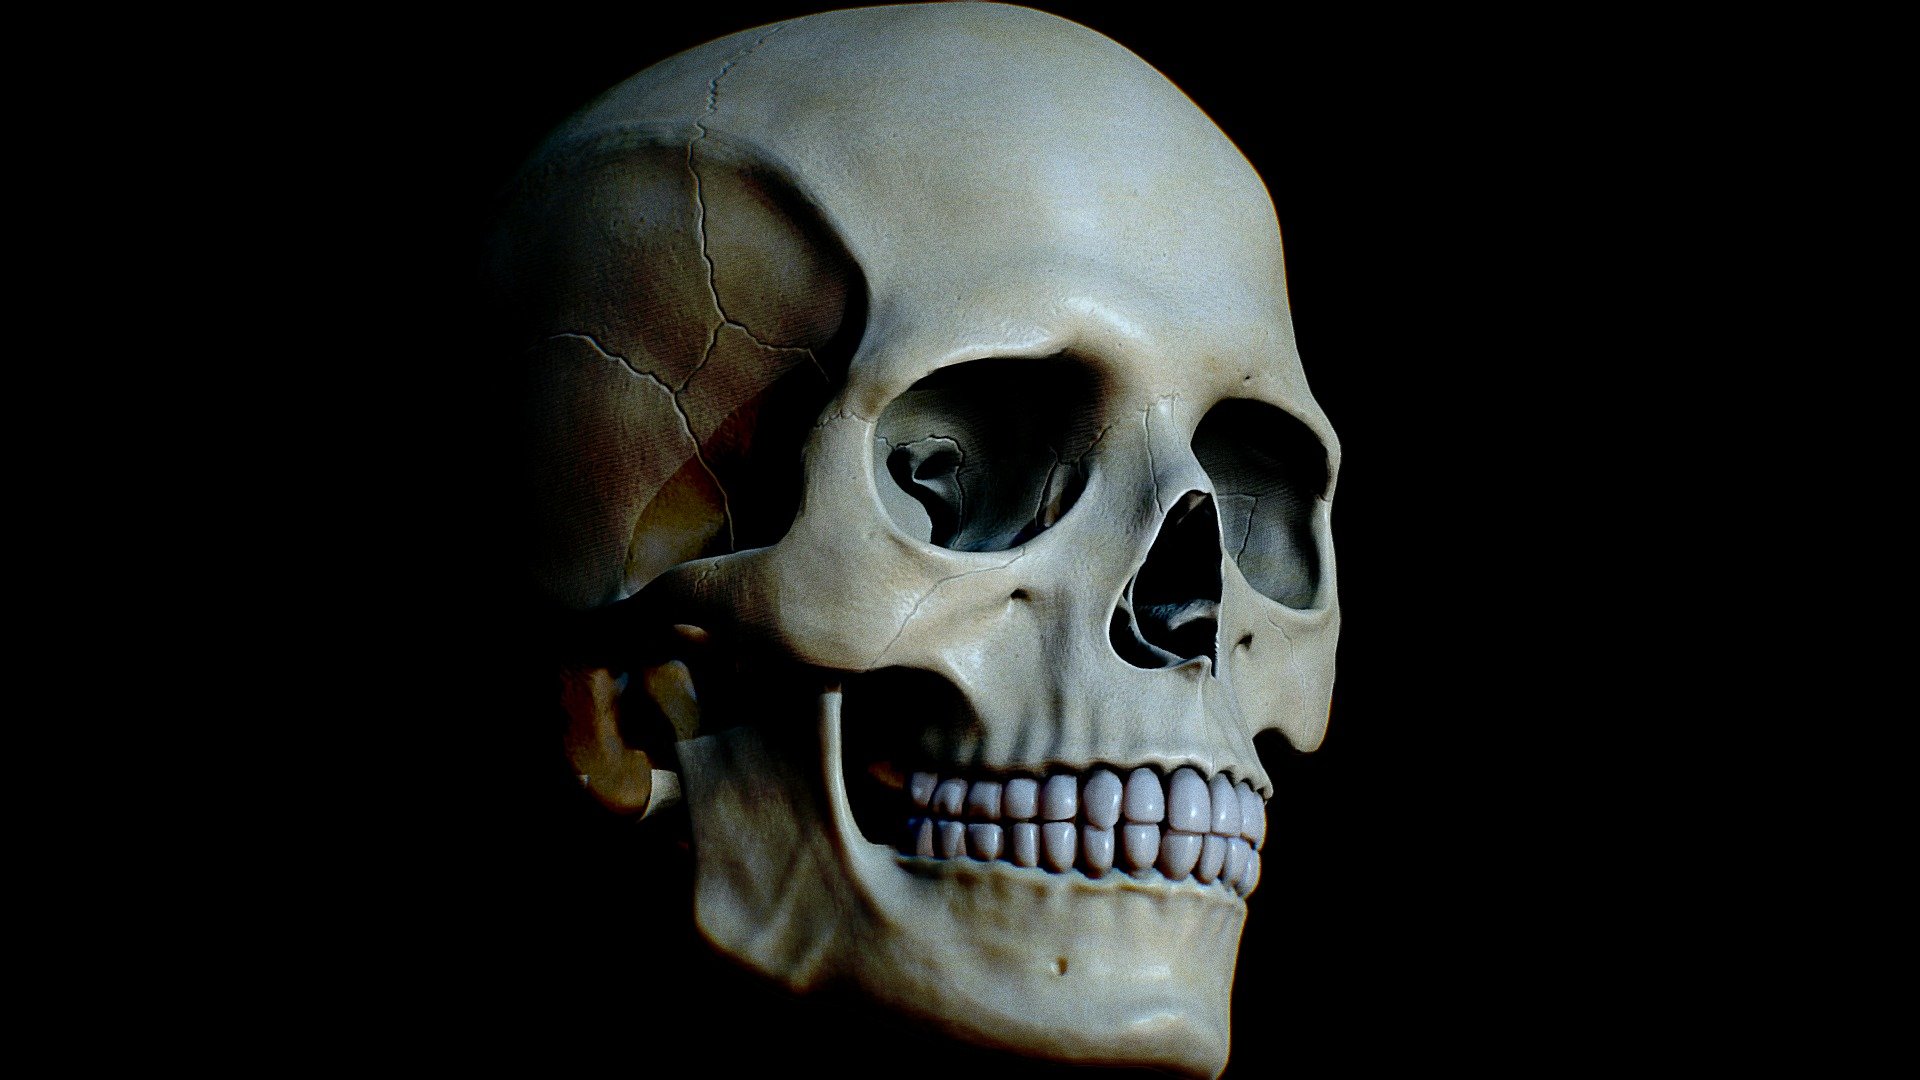 Playing around with my Caucasian Male Skull that I sculpted in Zbrush and textured in 3D Coat. The base sculpt was based on primitive shapes with correct anatomical proportions.

Had a bit of fun with 3D Settings and Post processing Filters. I really want to give a shout out to the Sketchfab team for the amazing tools and vast setting options. I love the freedom it gives me to elevate my art work 3d model